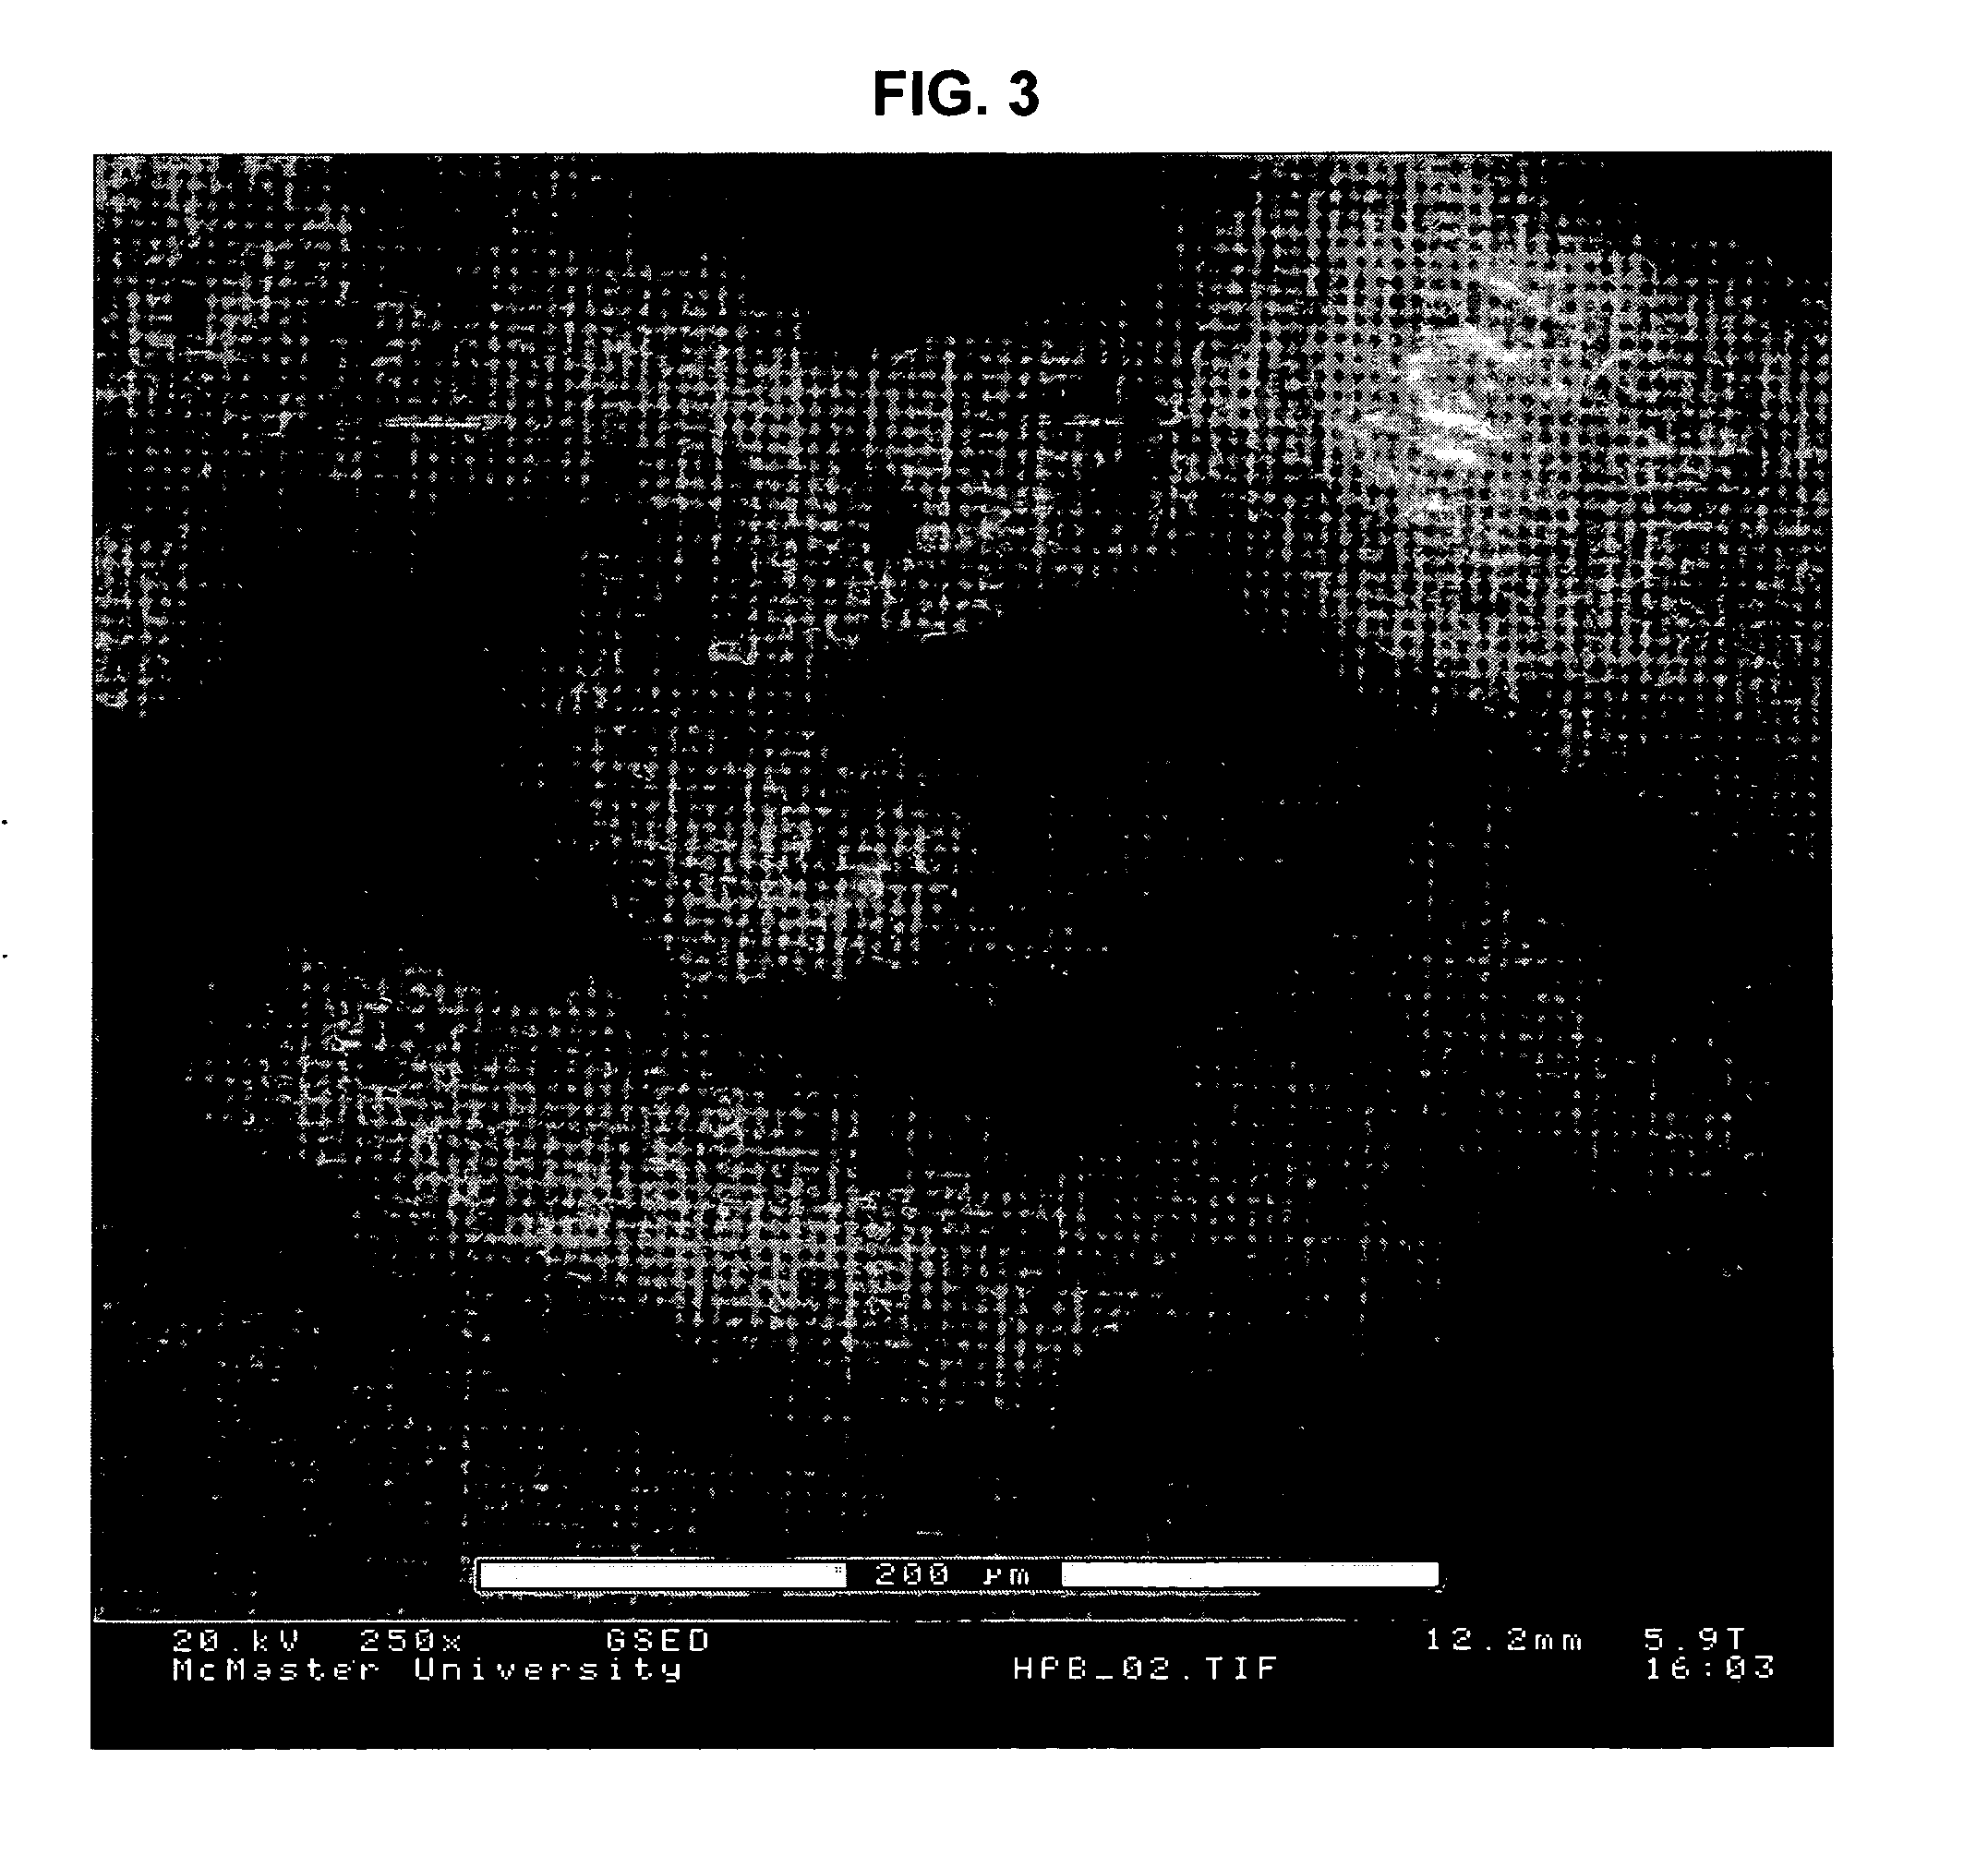 Alpha-type calcium sulfate hemihydrate compositions and methods of making same